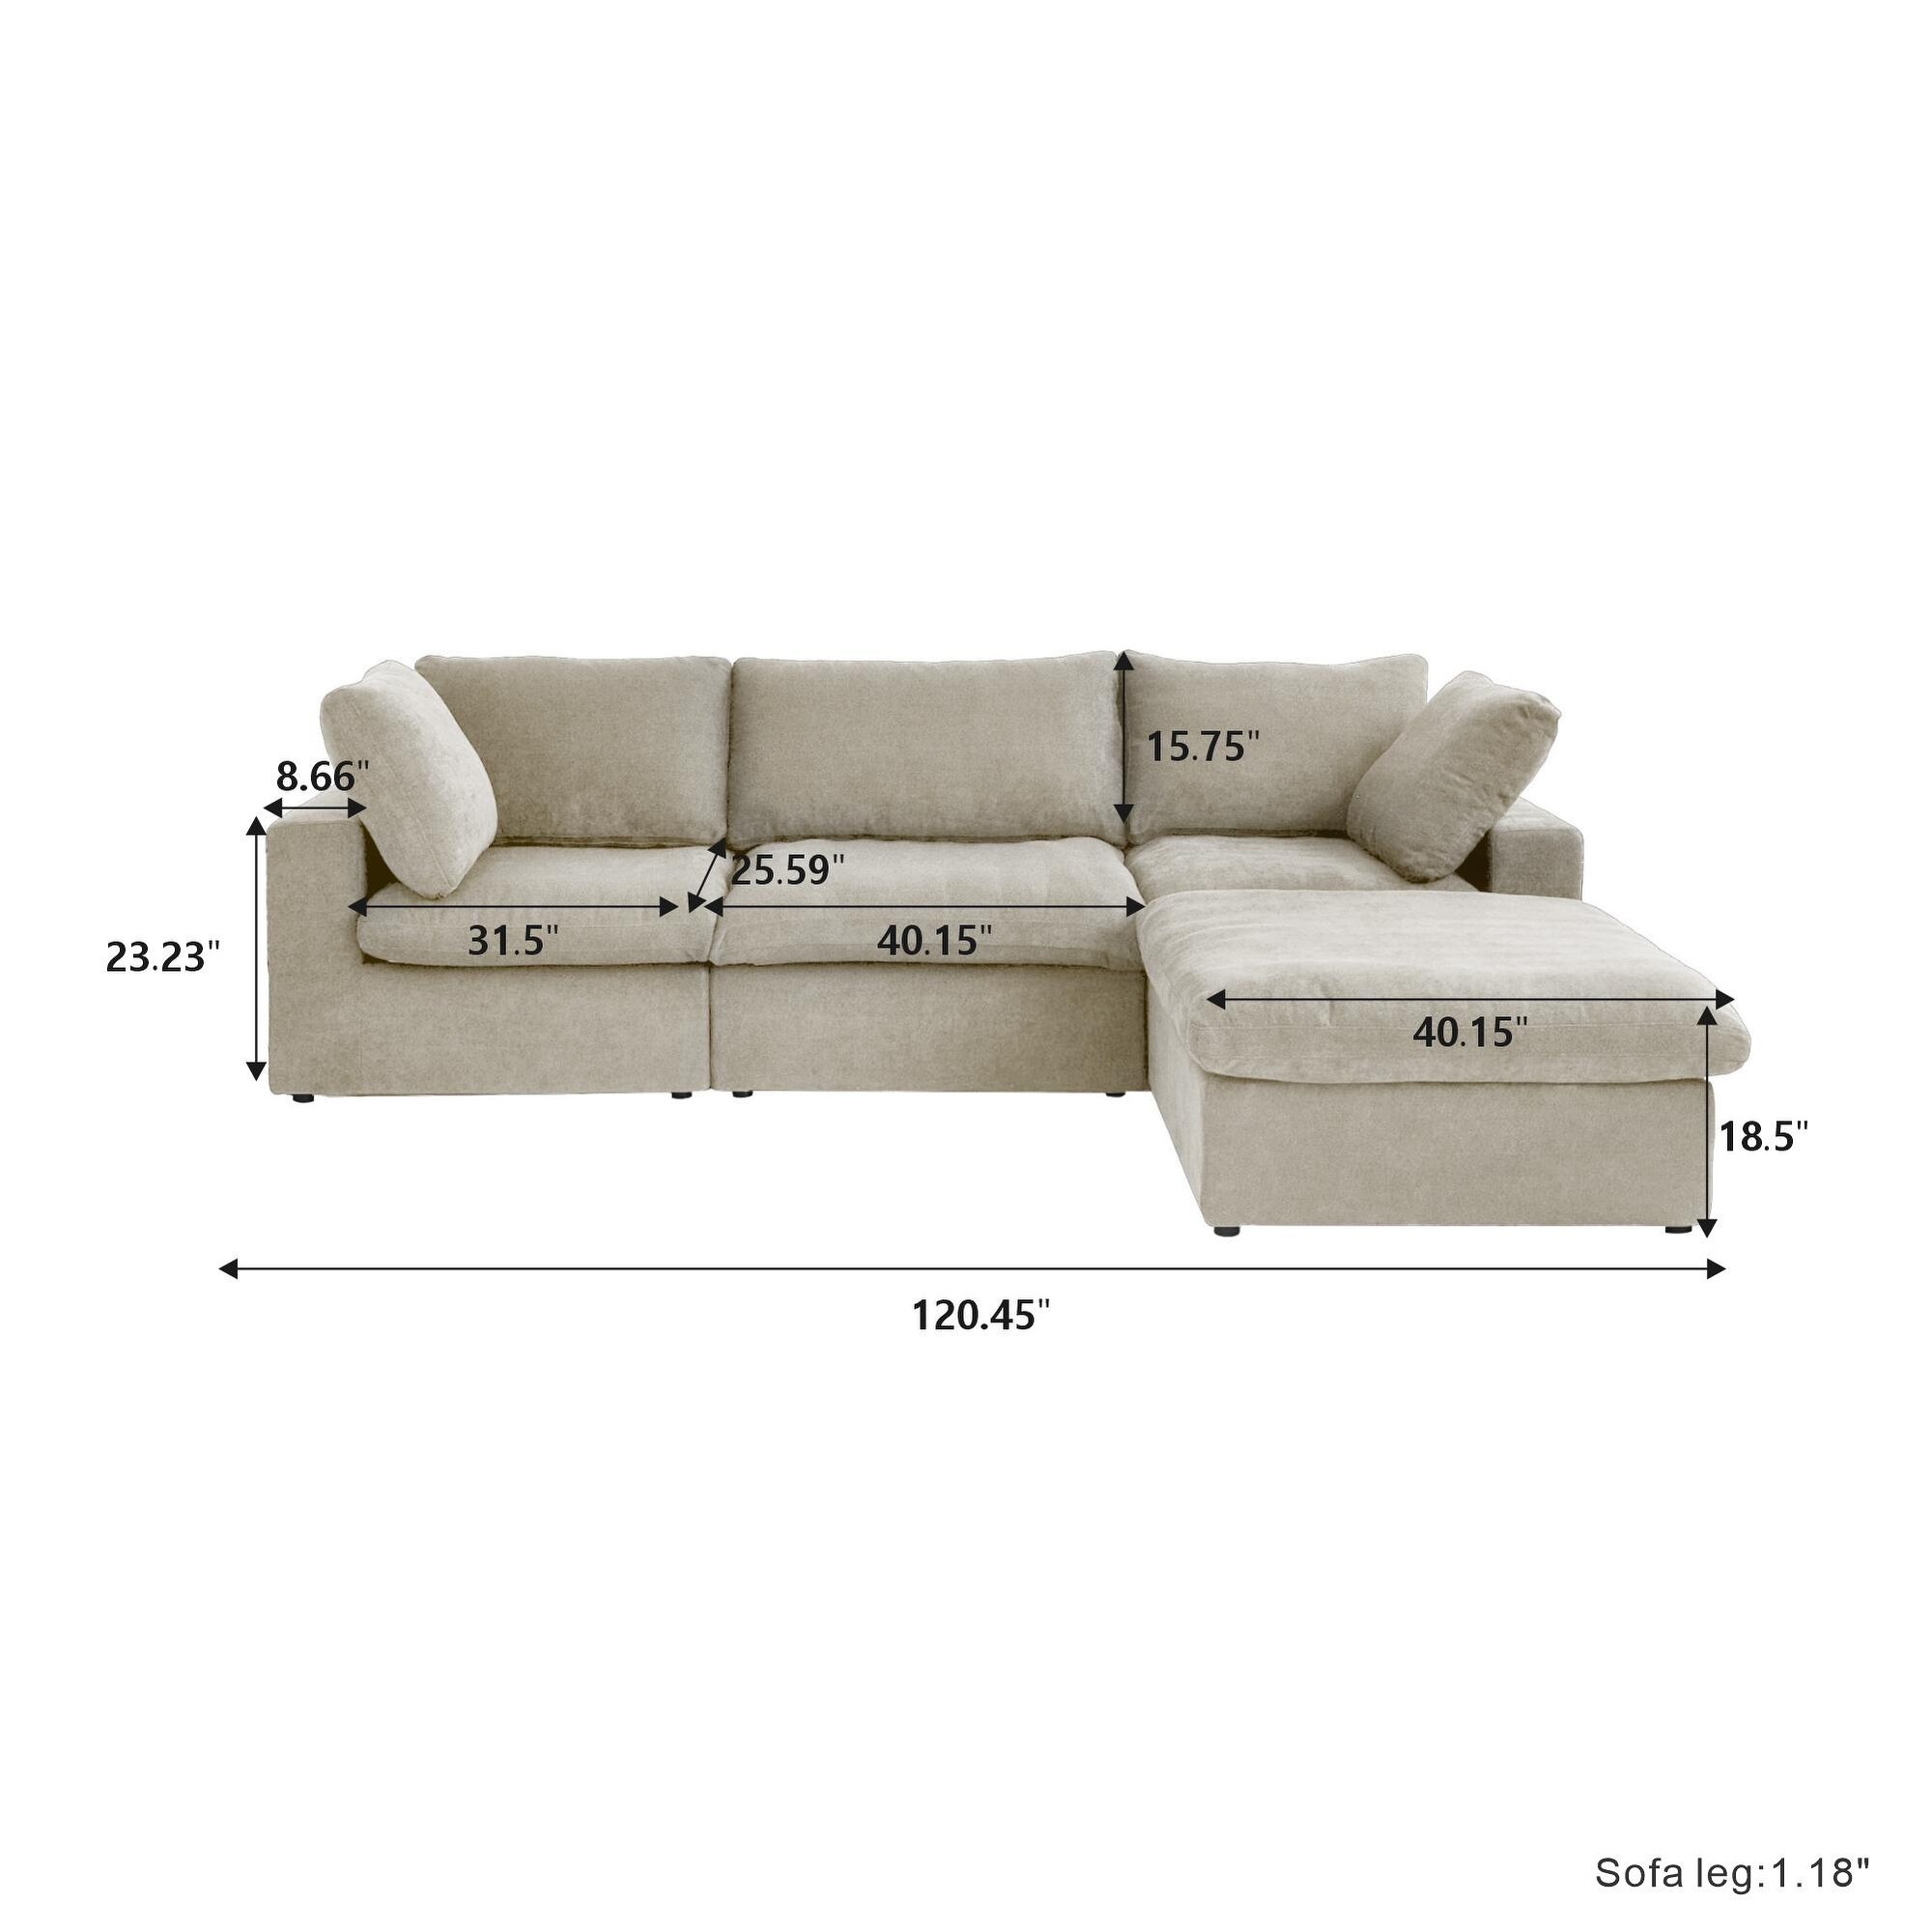 2 Pcs Silver Tone Snap Style Sofa Sectional Couch Connectors - Silver Tone  - 2.1 x 1.2(L*W) - Bed Bath & Beyond - 17578943